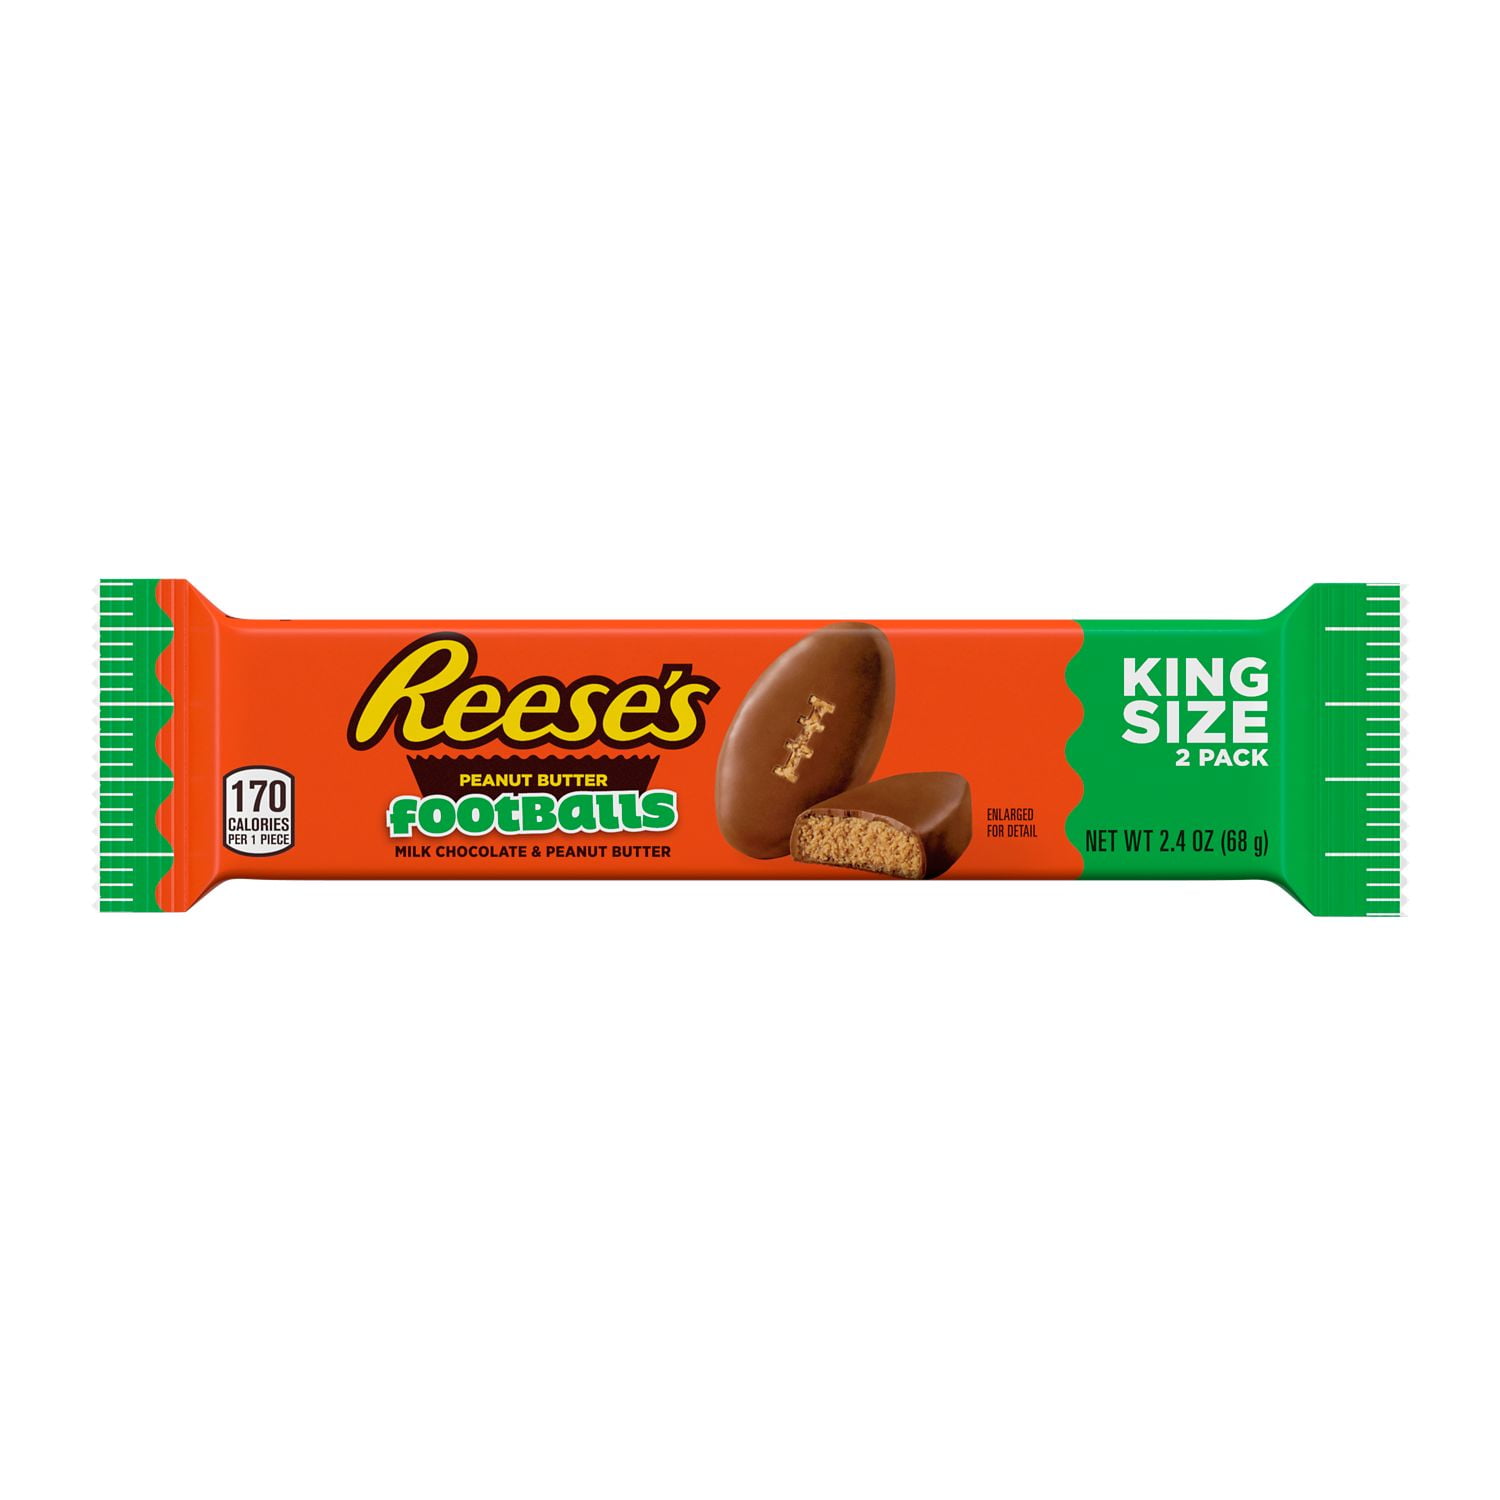 REESE'S, Milk Chocolate Peanut Butter Footballs Candy, Sports, 2.4 oz, King Size Pack